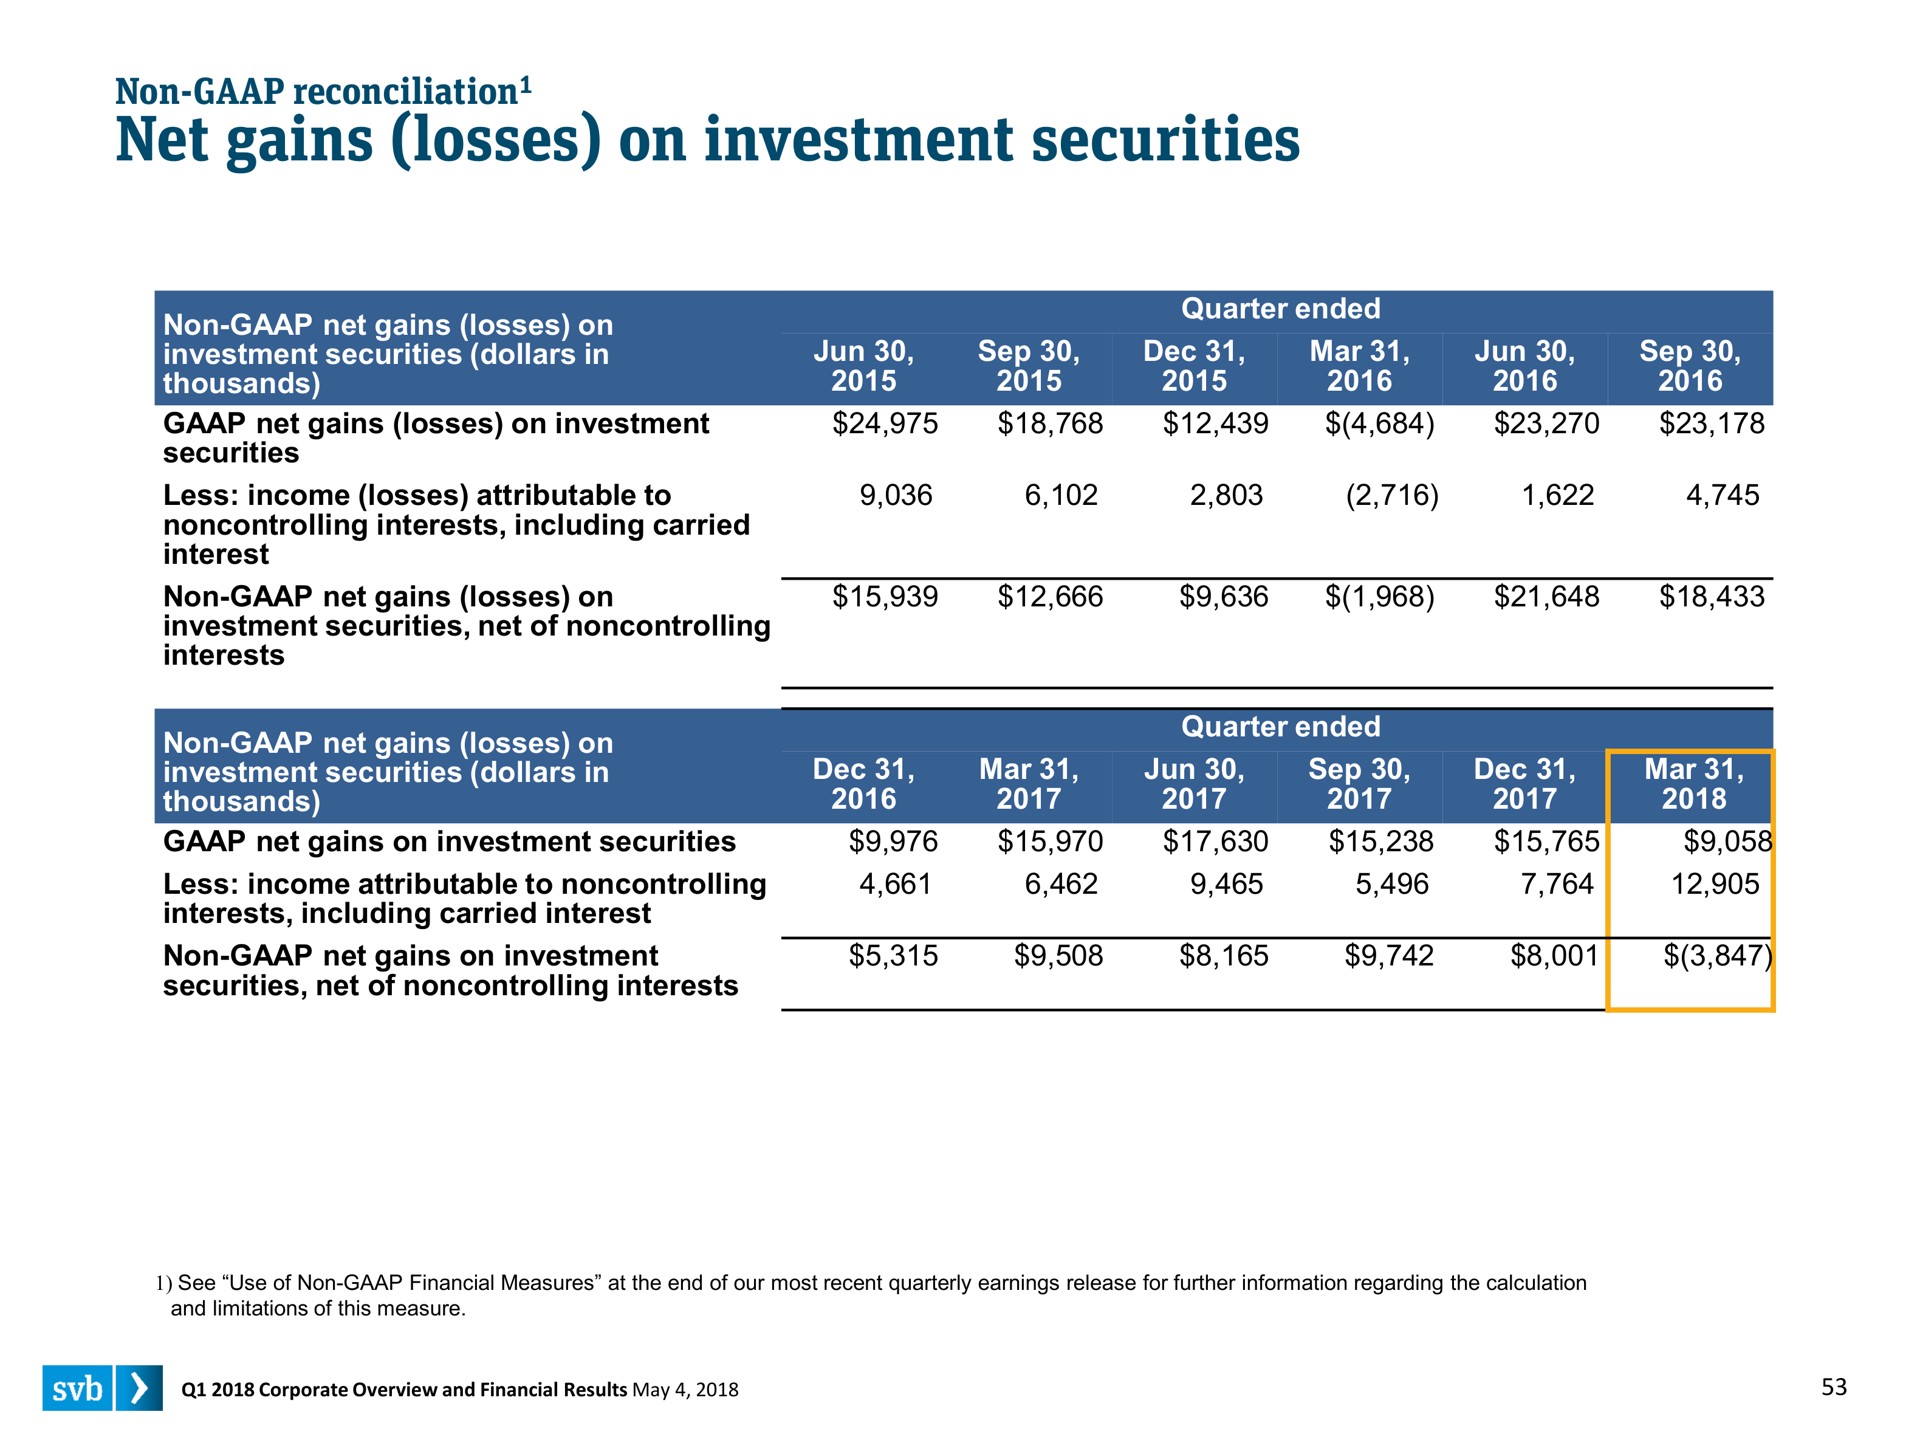 net gains losses on investment securities | Silicon Valley Bank